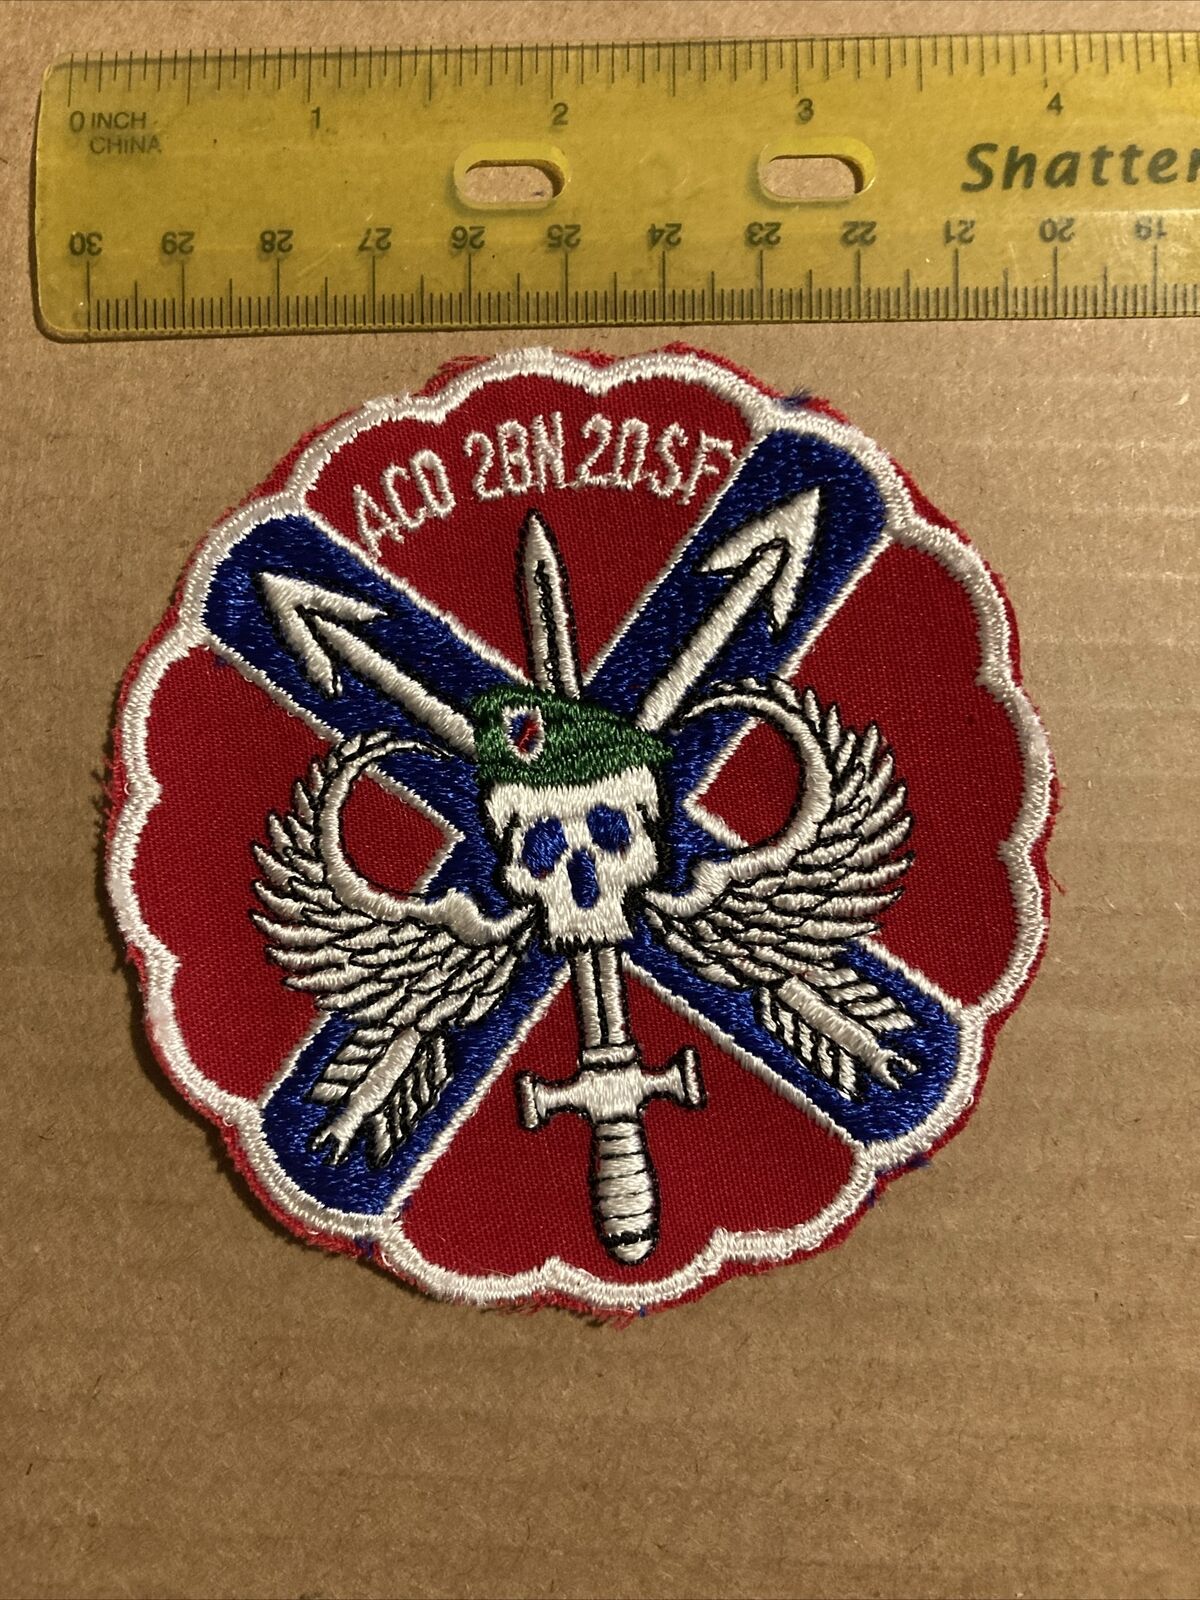 A Co 2bn 2dSF Military Patch Used